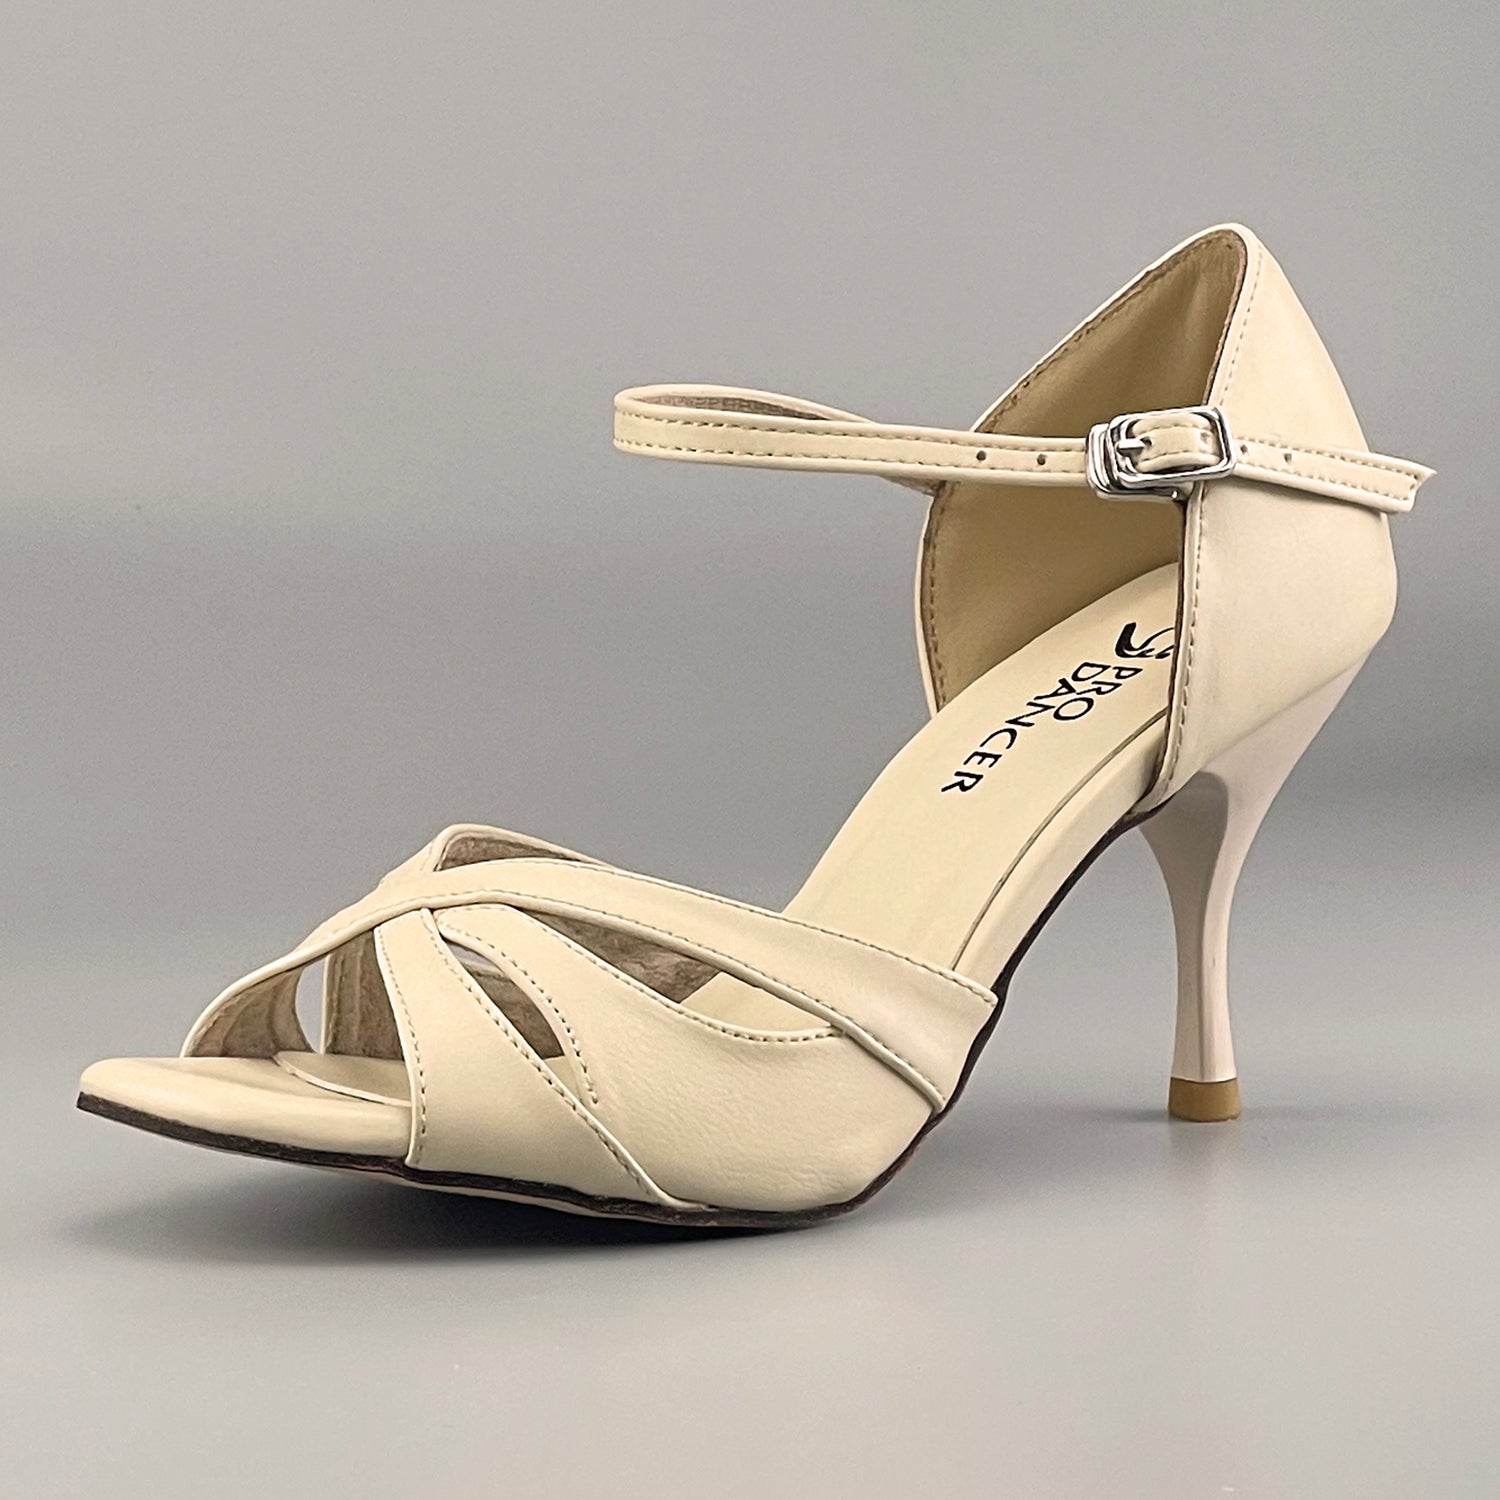 Pro Dancer Tango Argentino Shoes high heel dance sandals with leather sole in beige color (PD-9061A)4